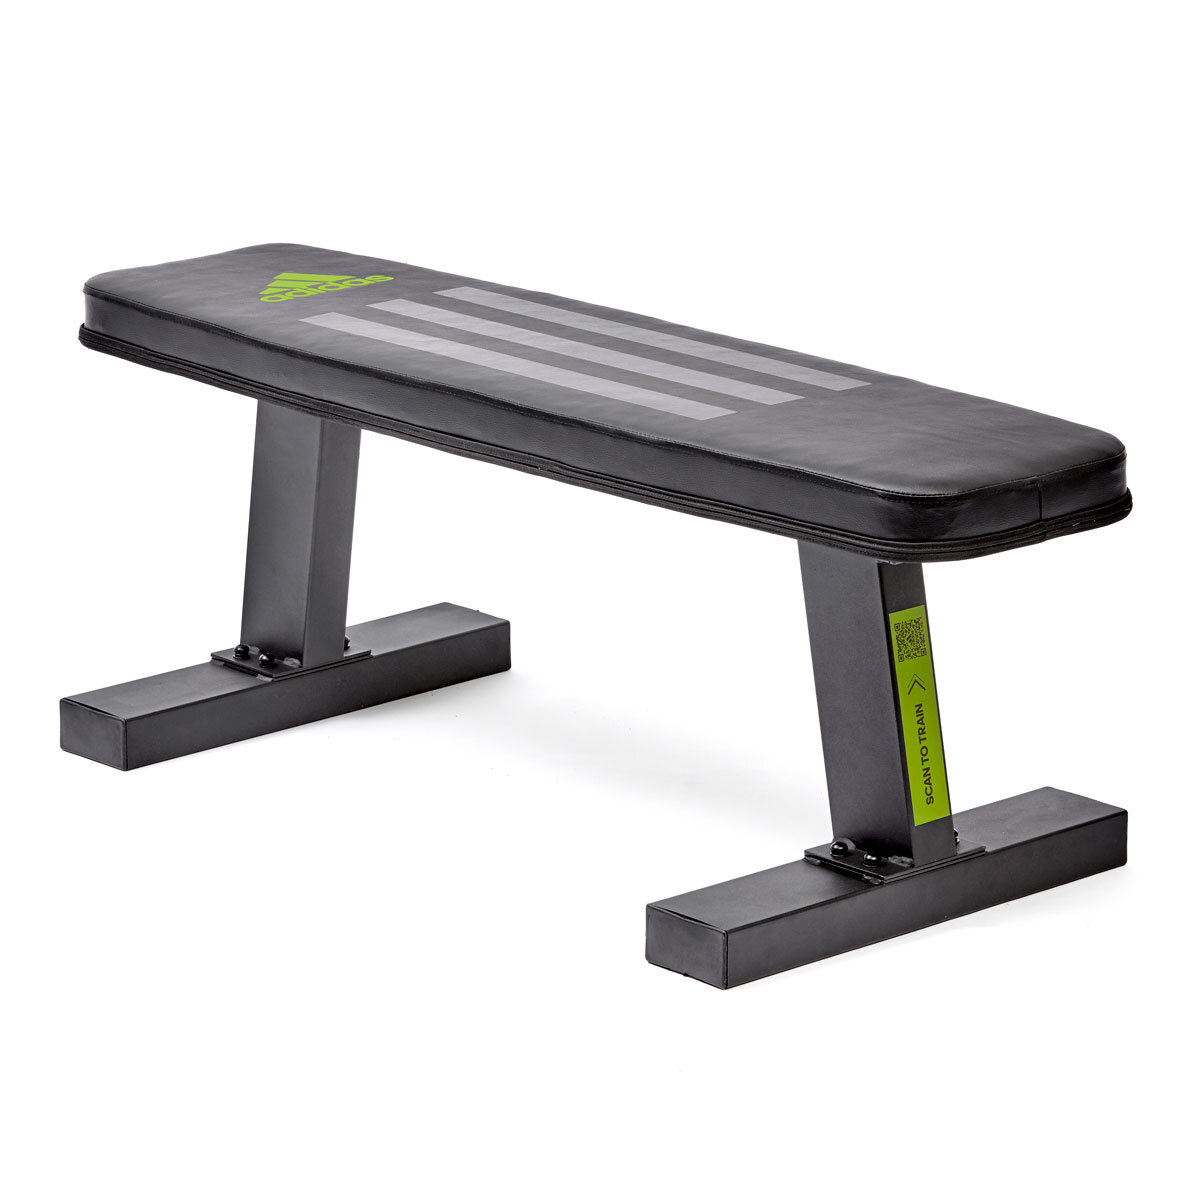 Lead Image for the Adidas Flat Bench